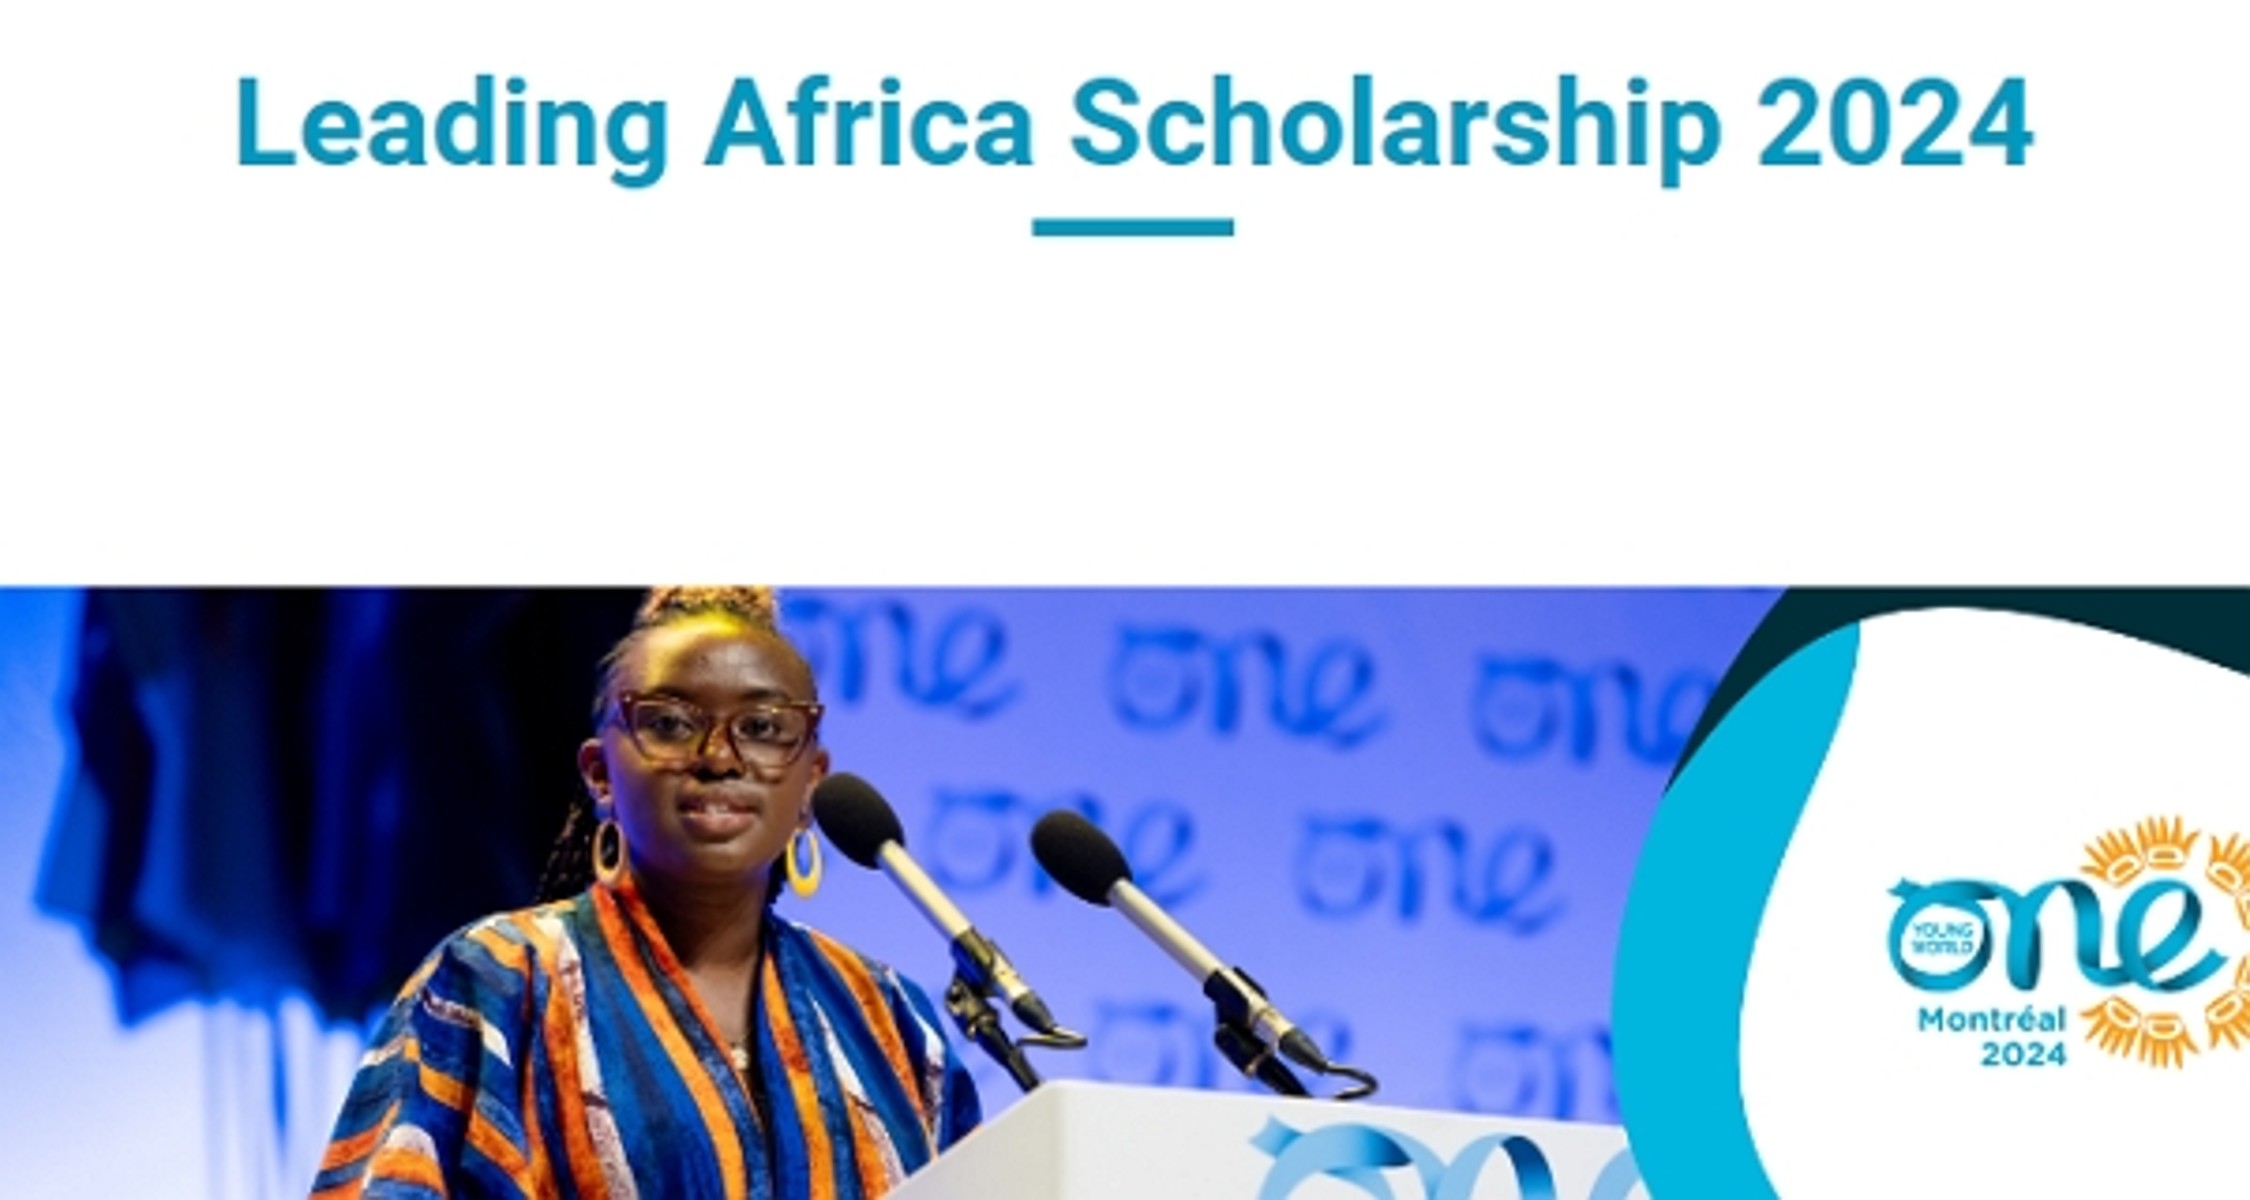 One Young World Leading Africa Scholarship 2024